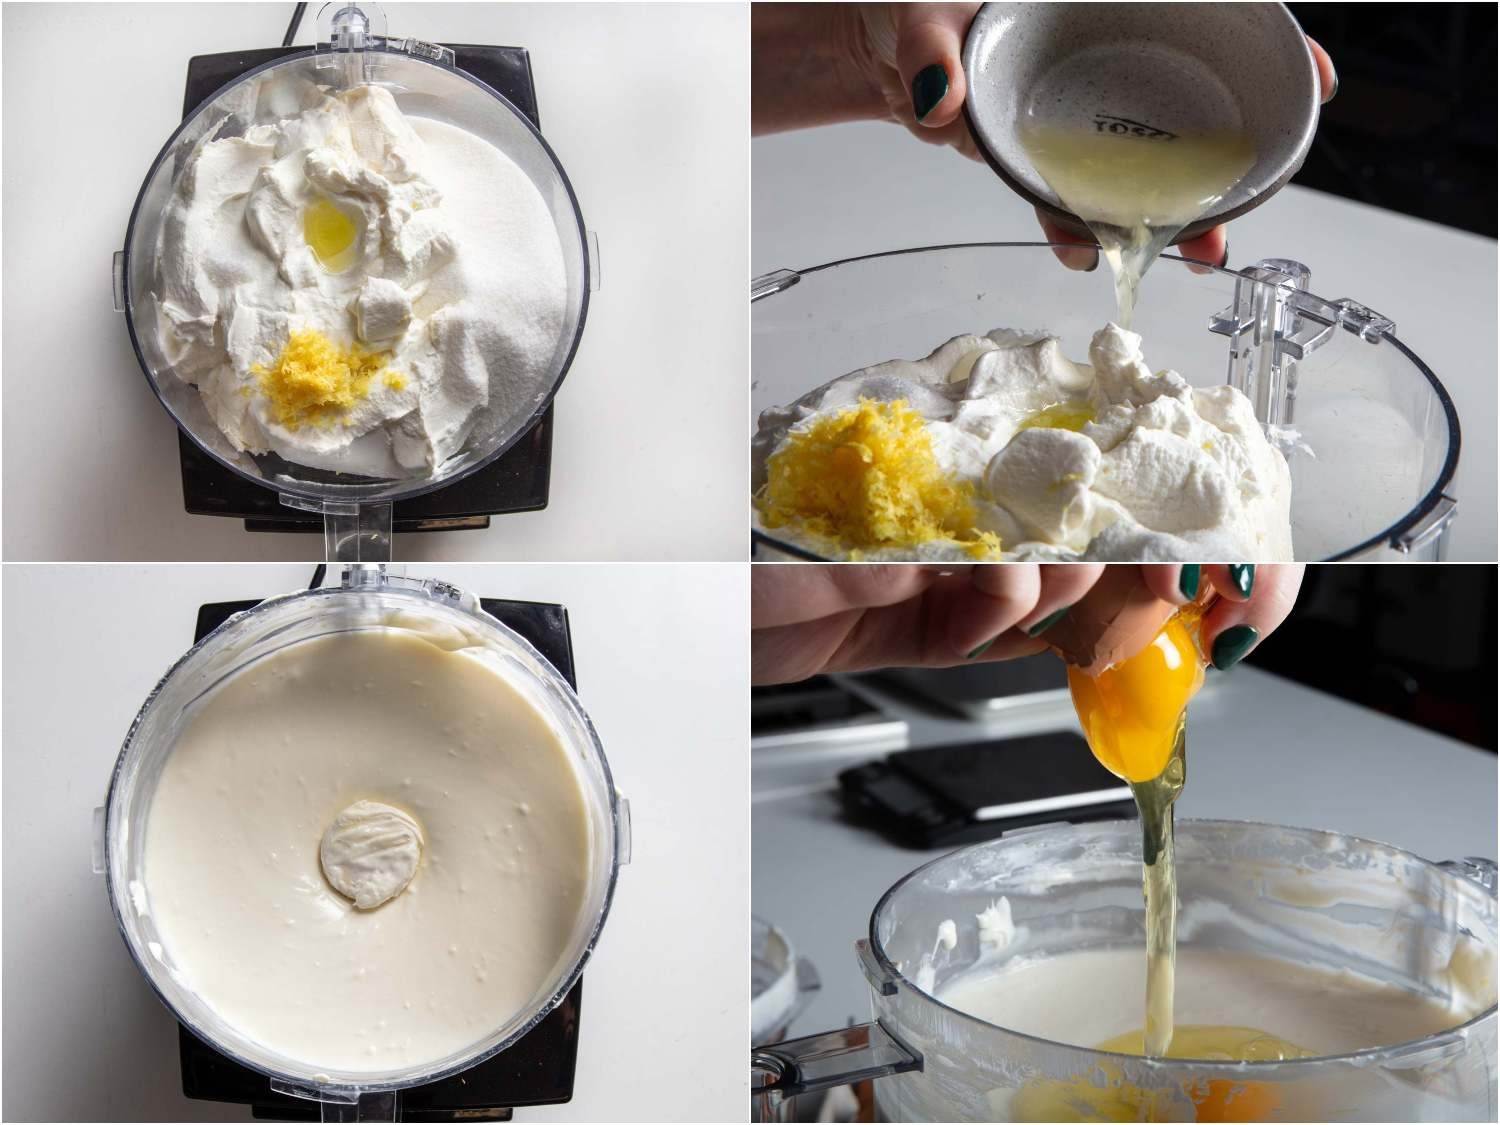 Preparing the cheesecake batter in a food processor